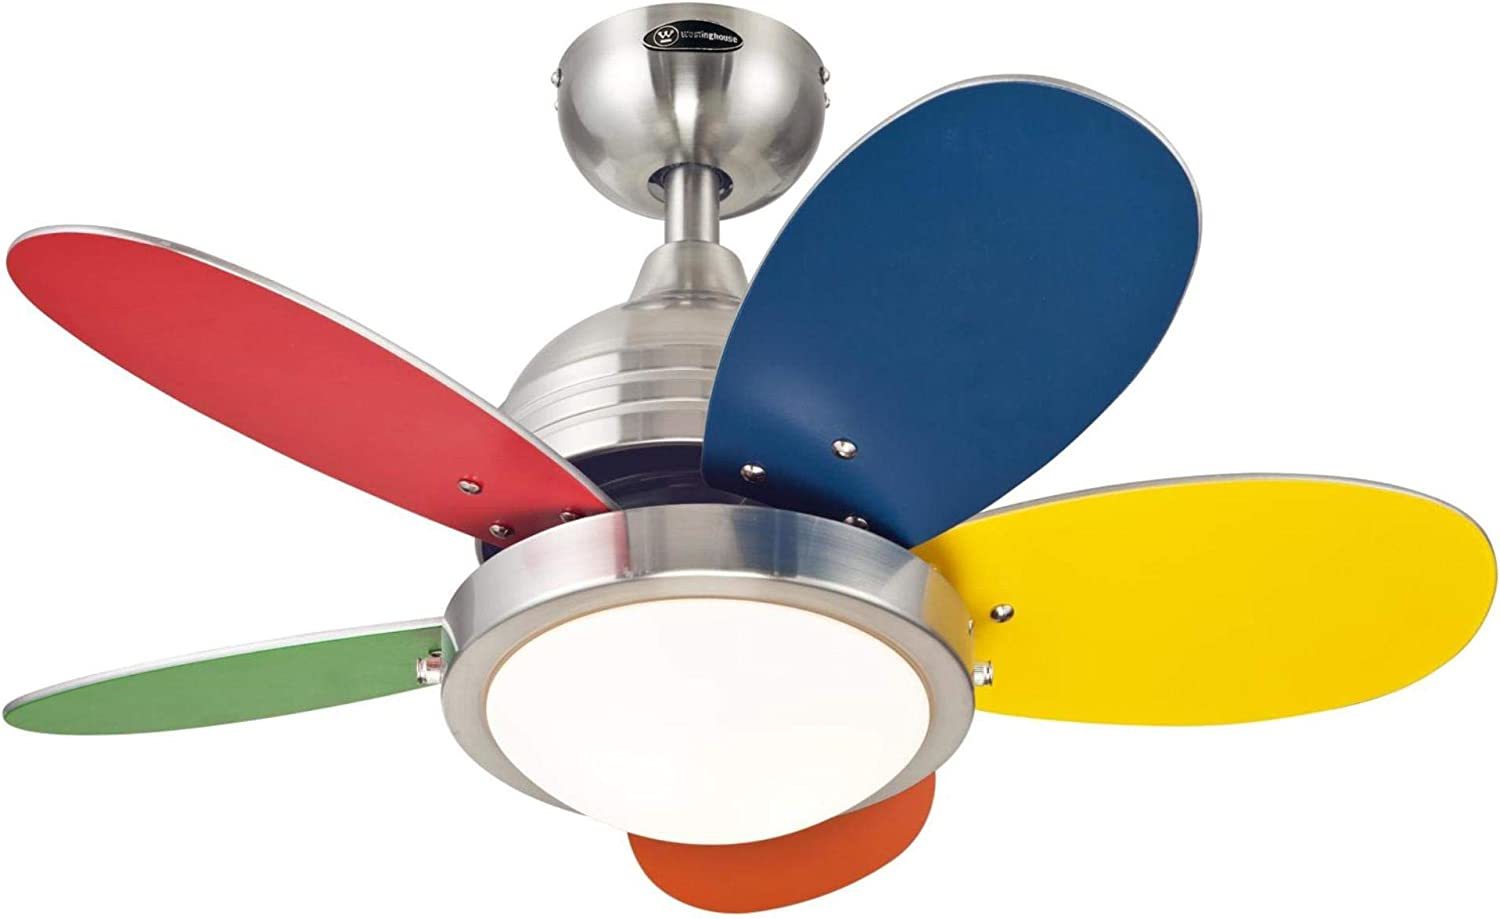 30" Roundabout Indoor Ceiling Fan With Light, Brushed Nickel, By Westinghouse - $175.97